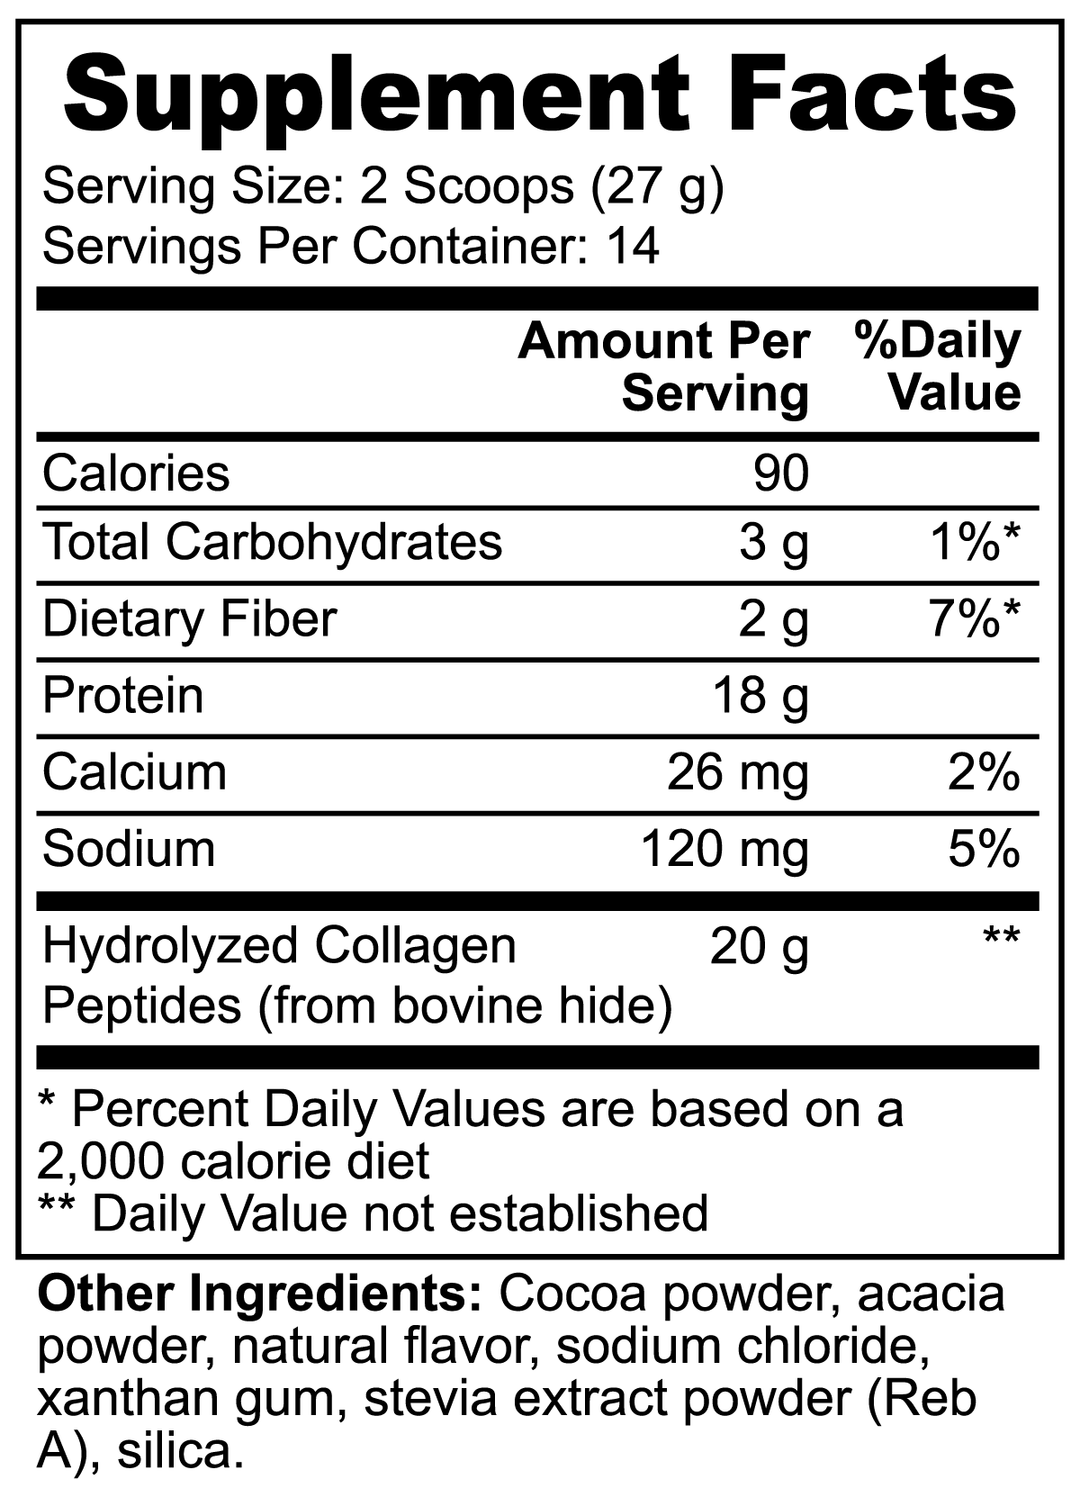 Nutritional label showing serving size, calories, nutrients, and ingredients for a GreenHat Grass-Fed Collagen Peptides Powder (Chocolate), including carbohydrates, protein, collagen peptides, and vitamins.